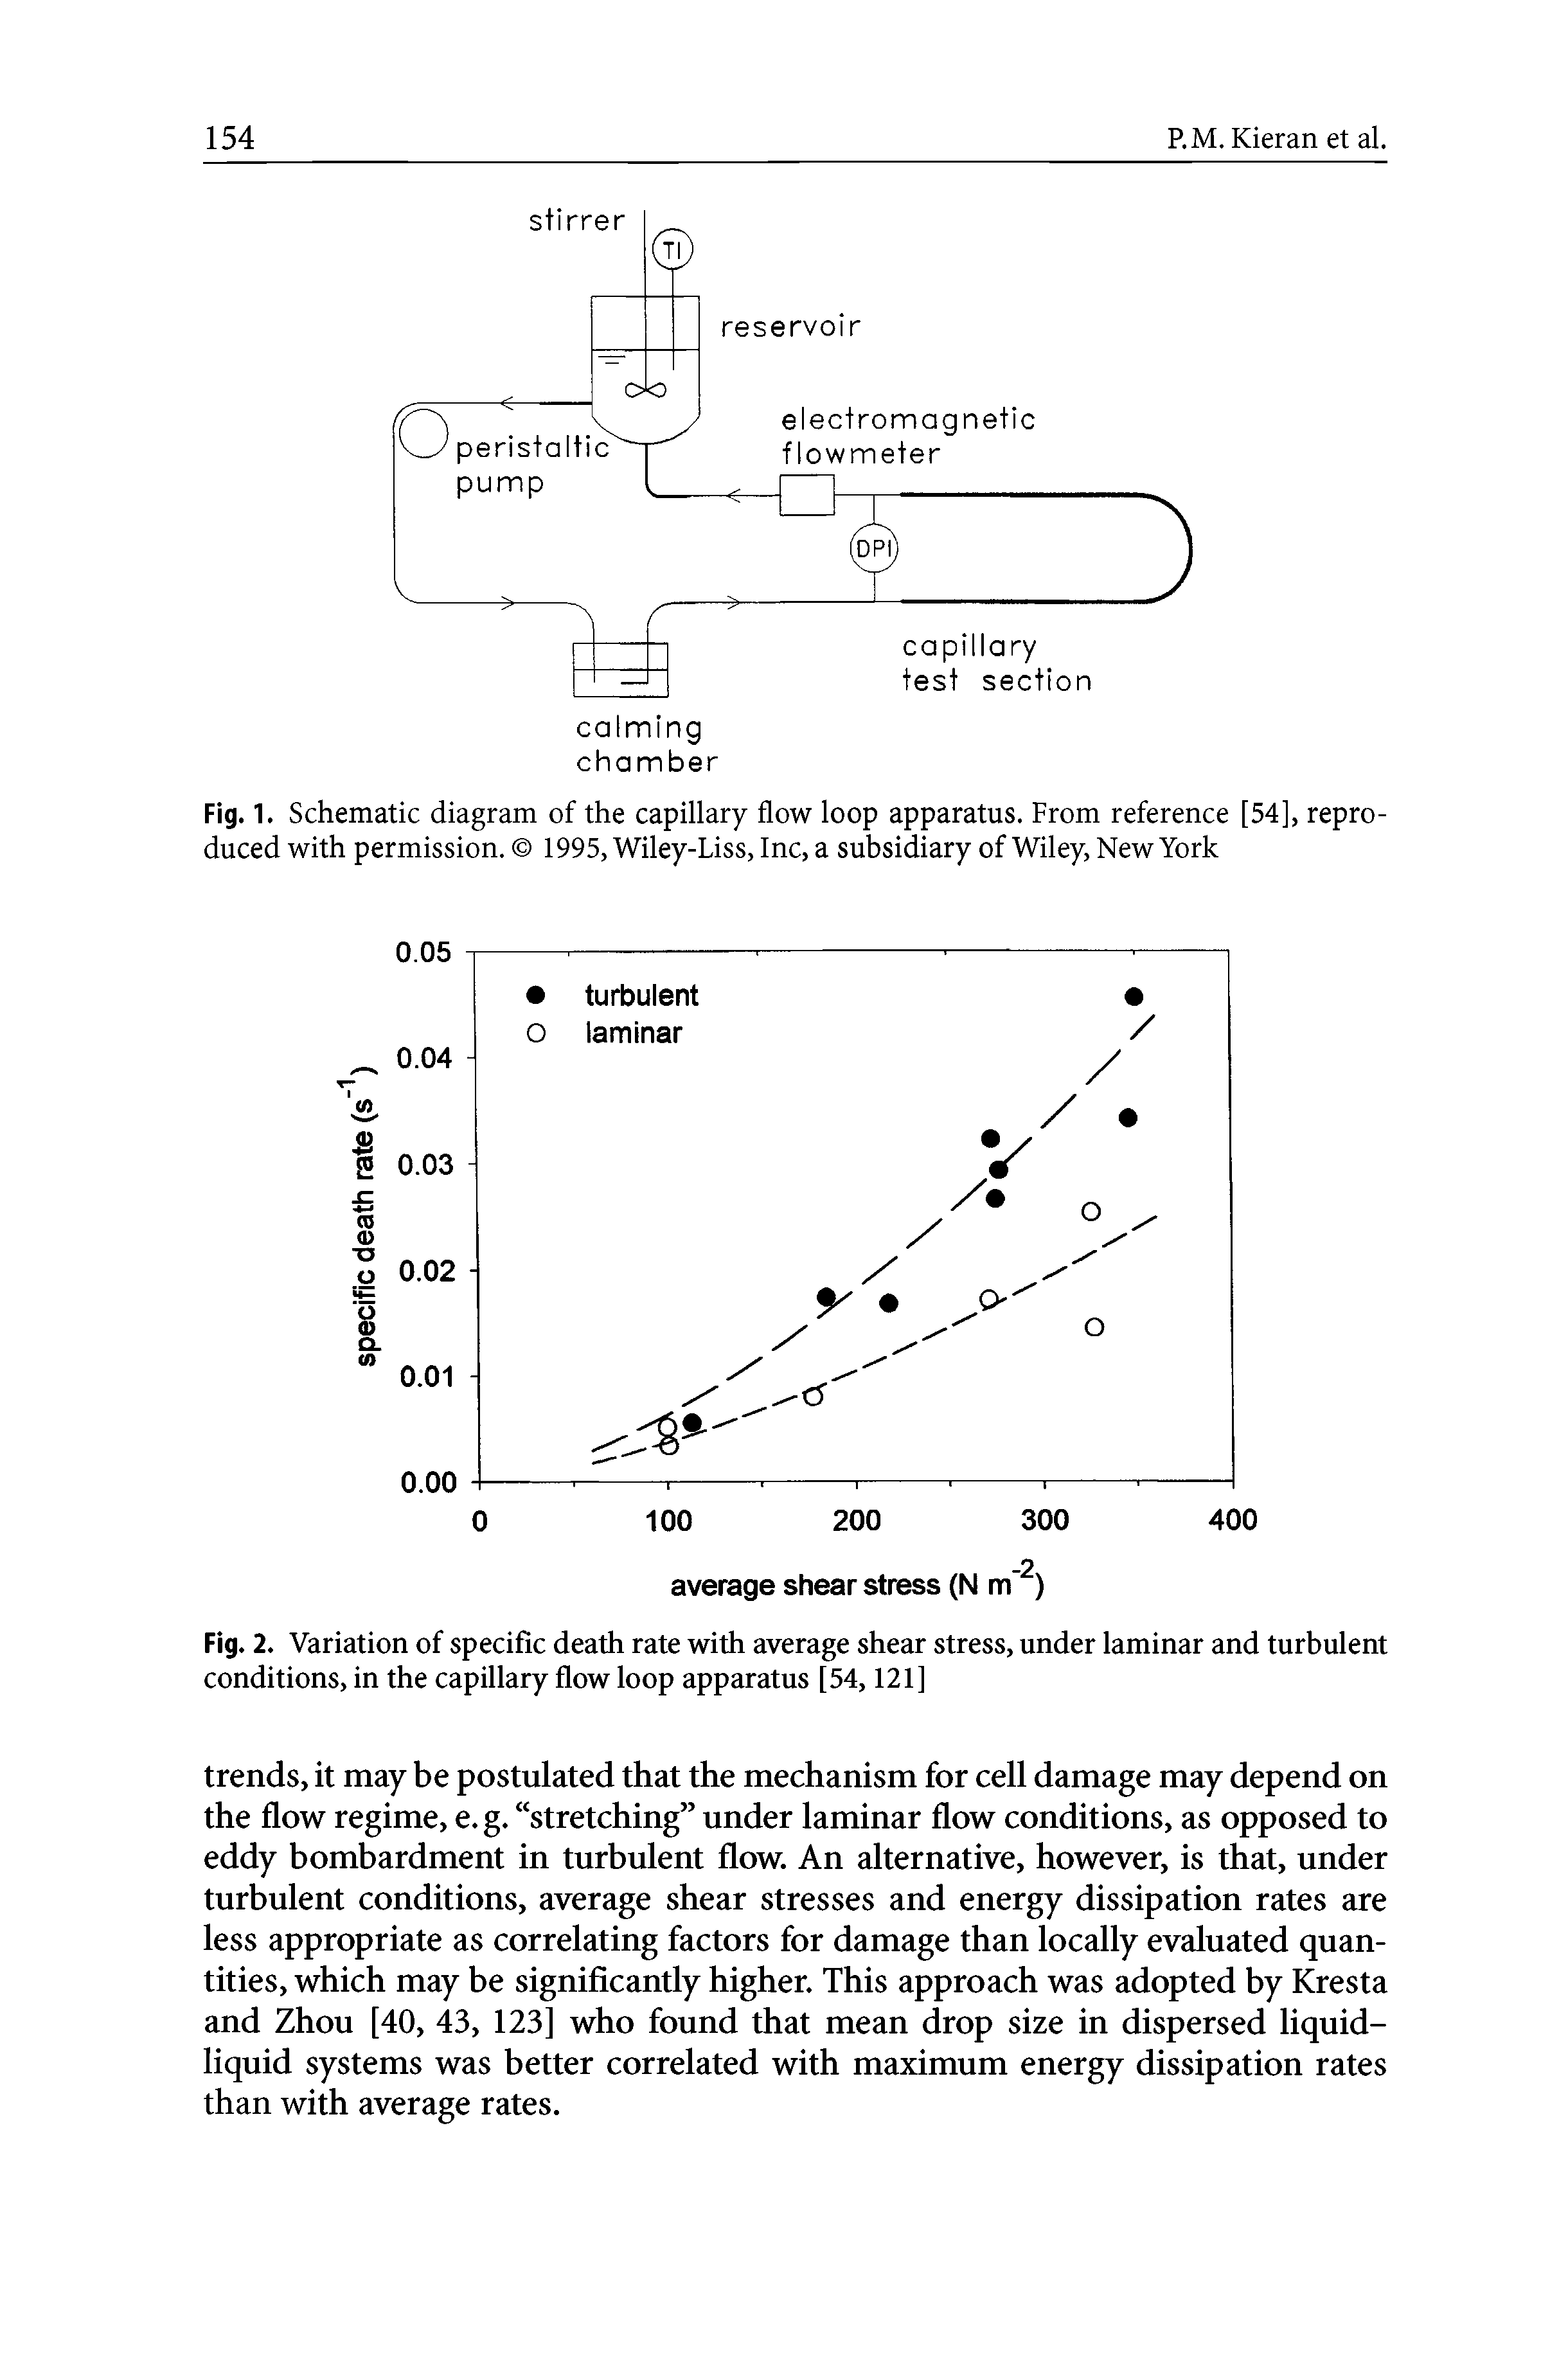 Fig. 1. Schematic diagram of the capillary flow loop apparatus. From reference [54], reproduced with permission. 1995, Wiley-Liss, Inc, a subsidiary of Wiley, New York...